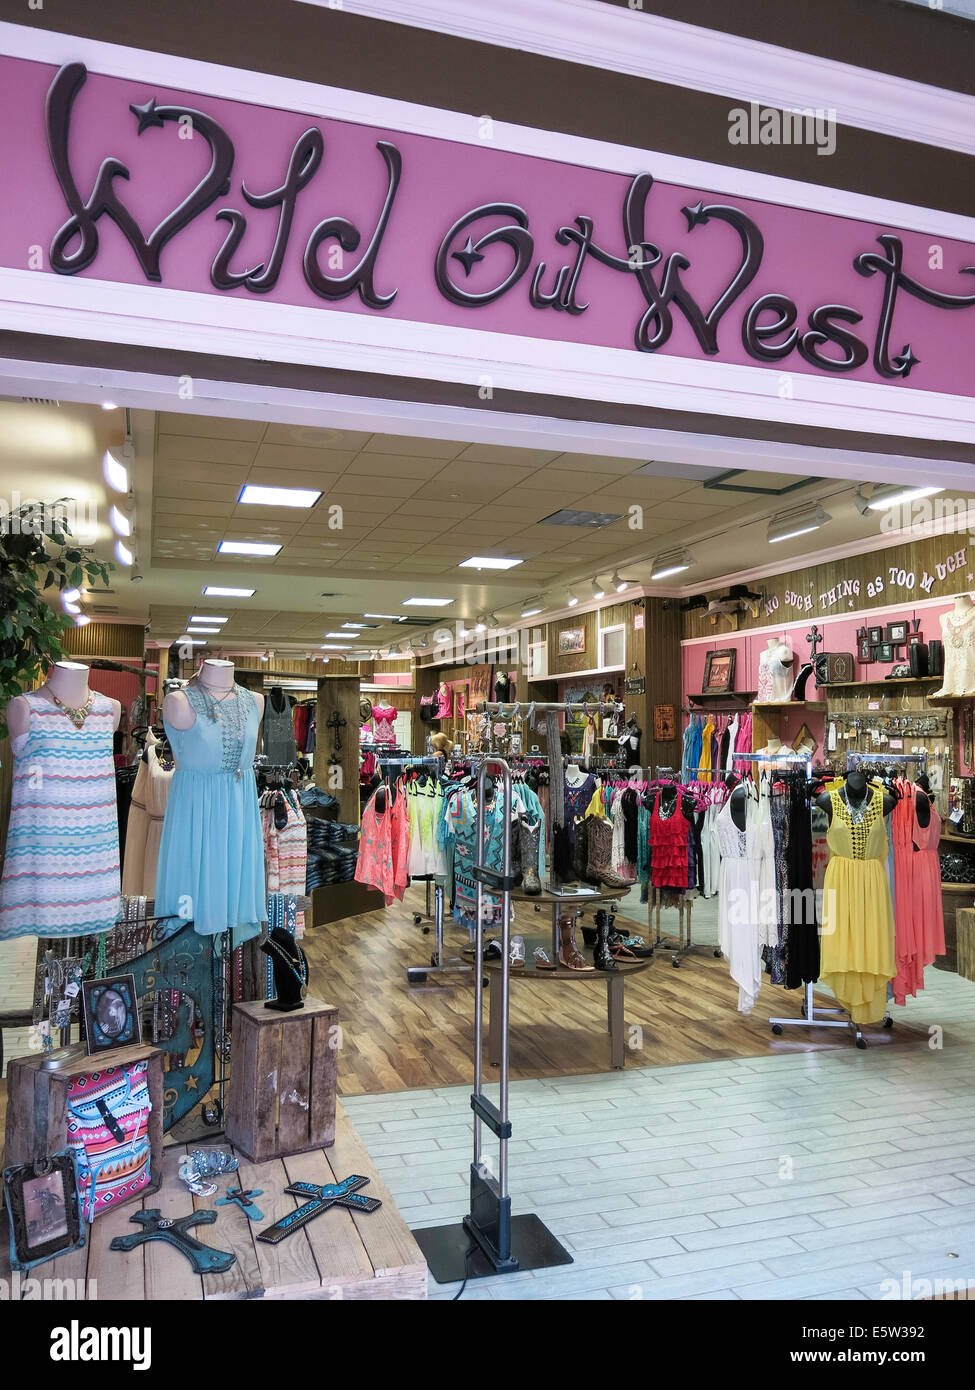 'Wild Out West' Boutique in the Holiday Village Mall, Great Falls, MT, USA Stock Photo